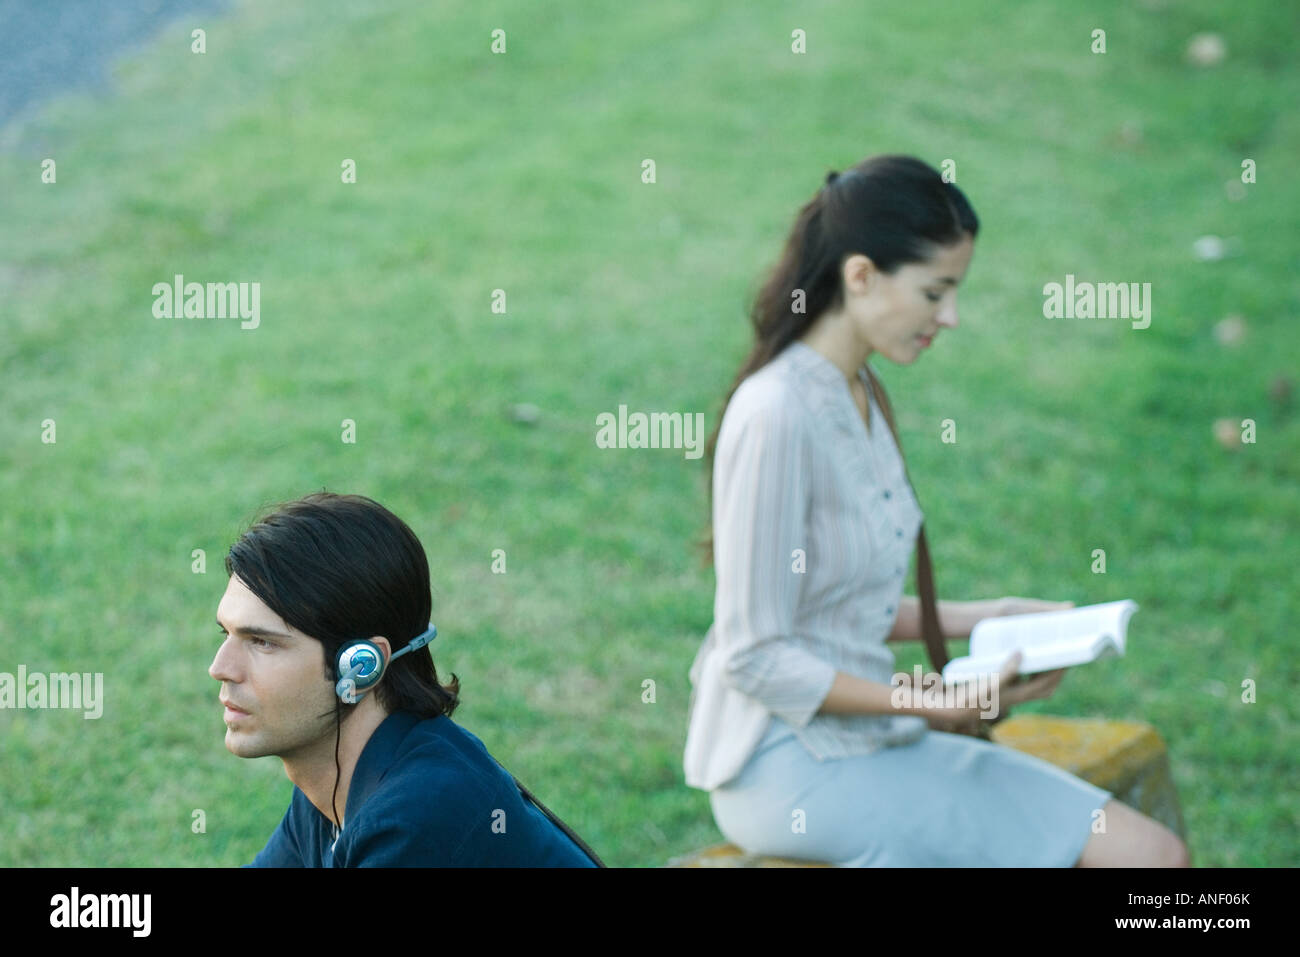 People sitting in park, man listening to headphones while woman reads book Stock Photo